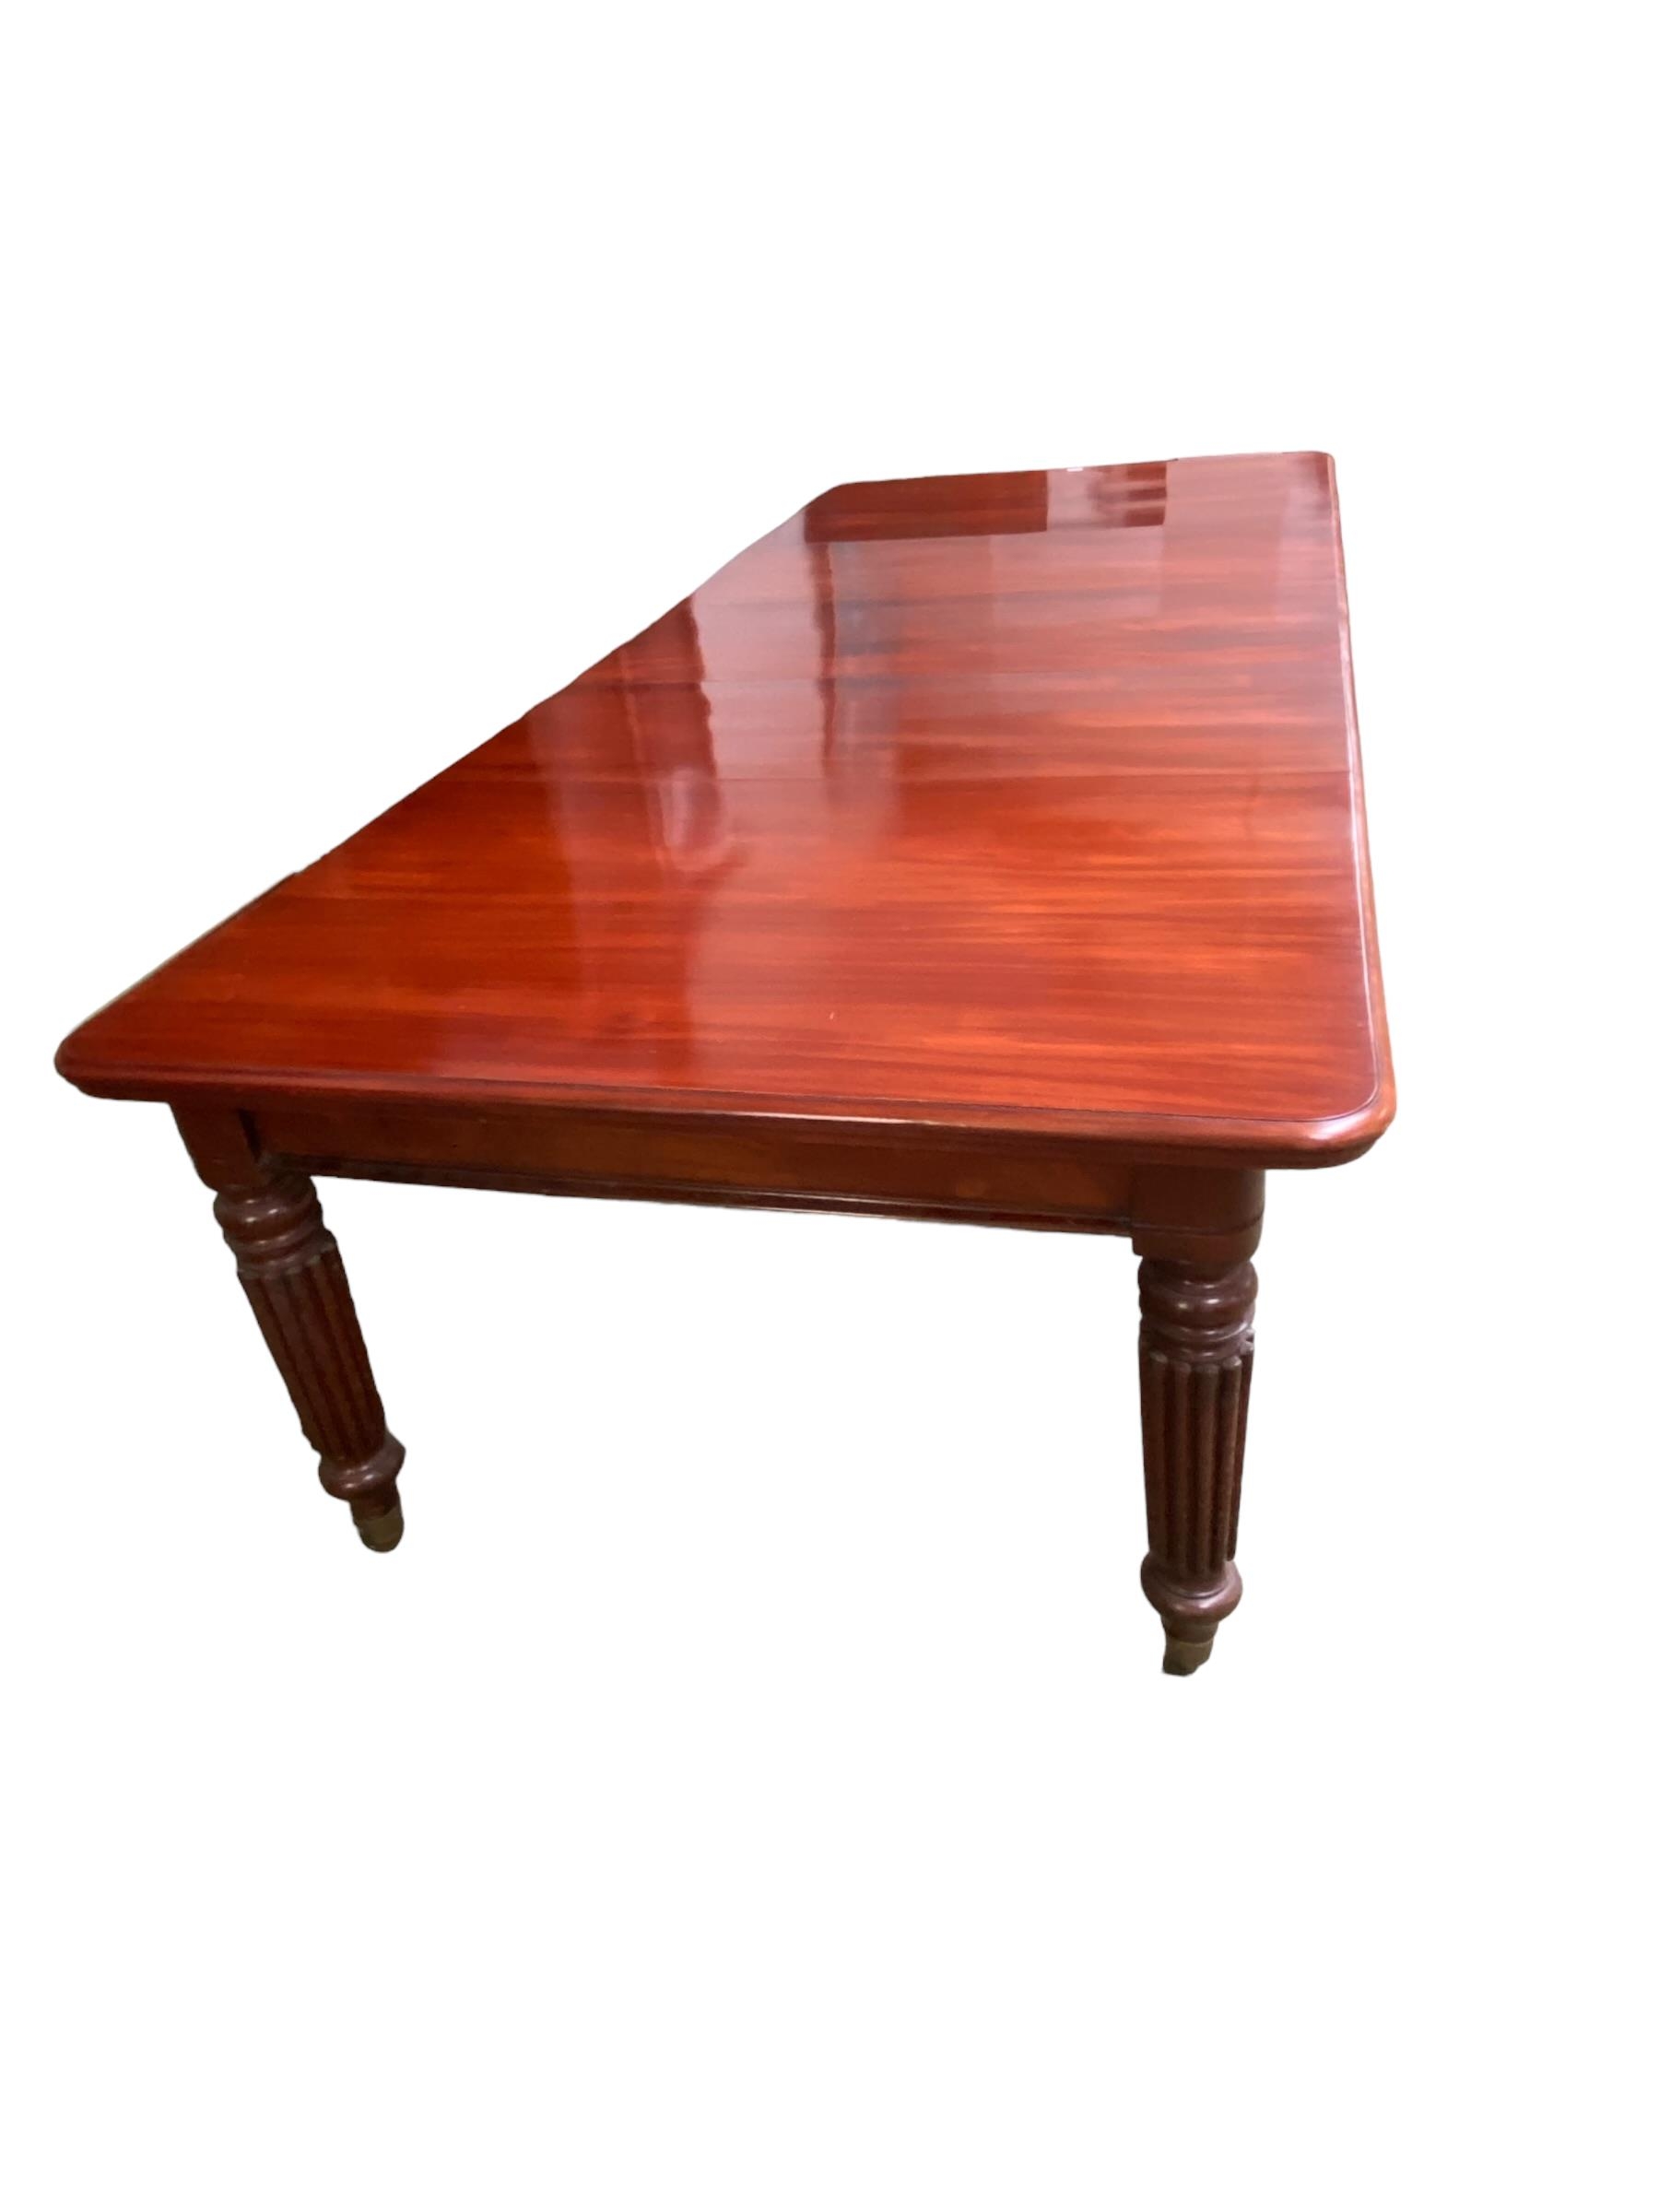 Victorian mahogany extending oblong dining table, on 4 tapering reeded legs, with brass castors, 3 - Image 3 of 3